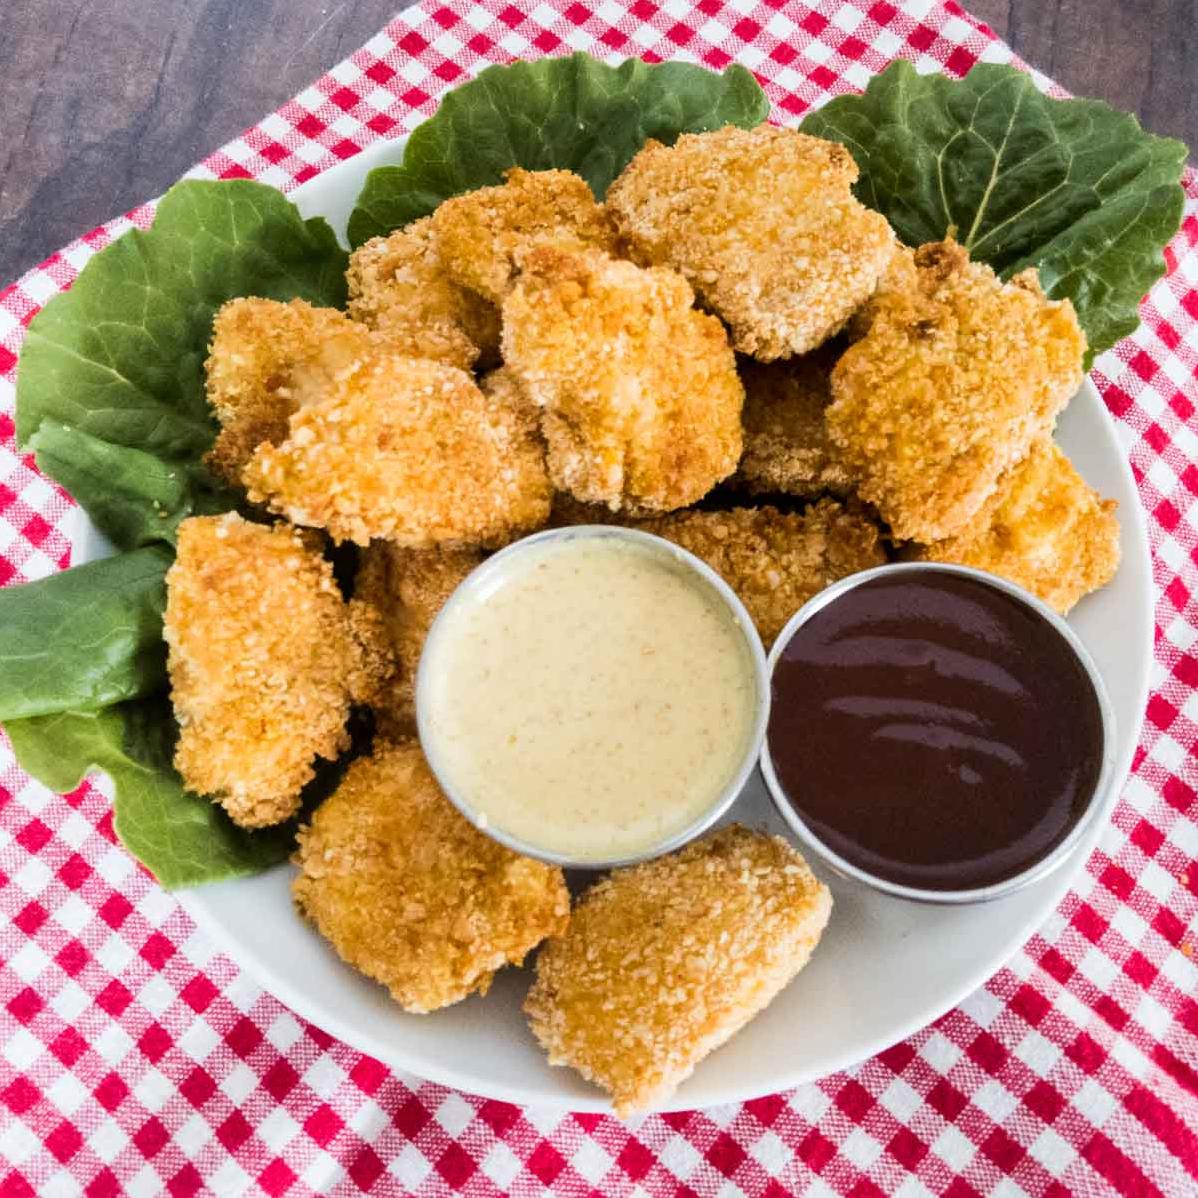  These tasty nuggets are made of simple and wholesome ingredients.